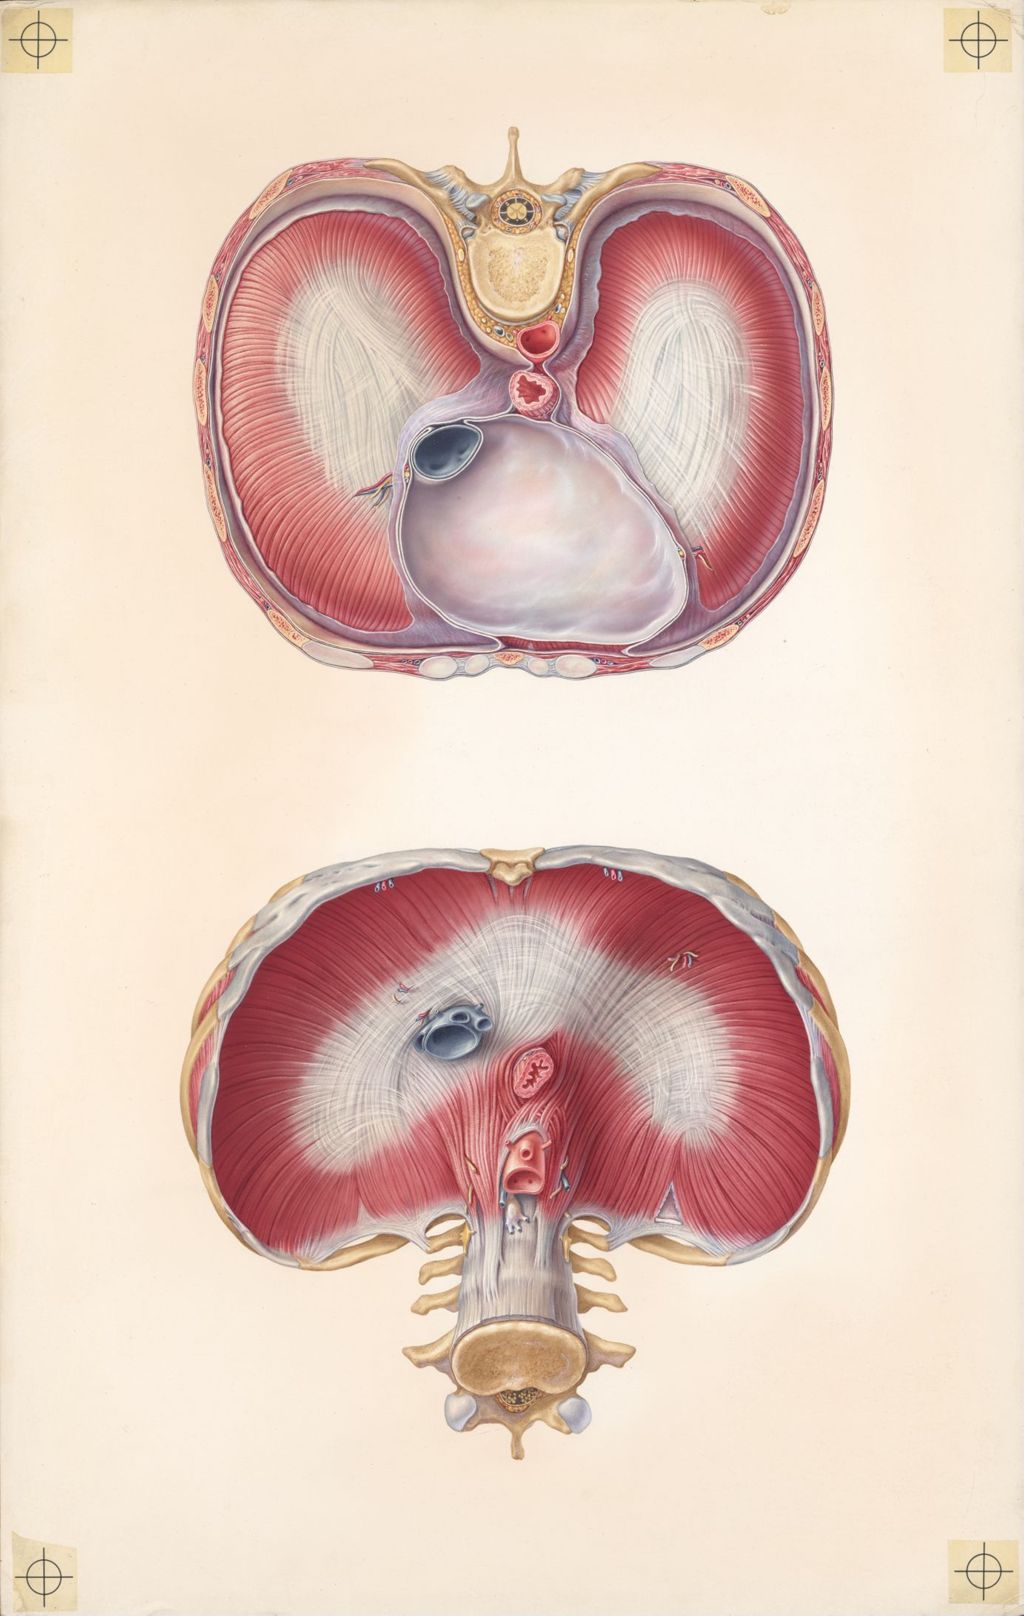 Miniature of Doctor-Patient Explanatory Atlas of Anatomy, The Anatomy of the Diaphragm